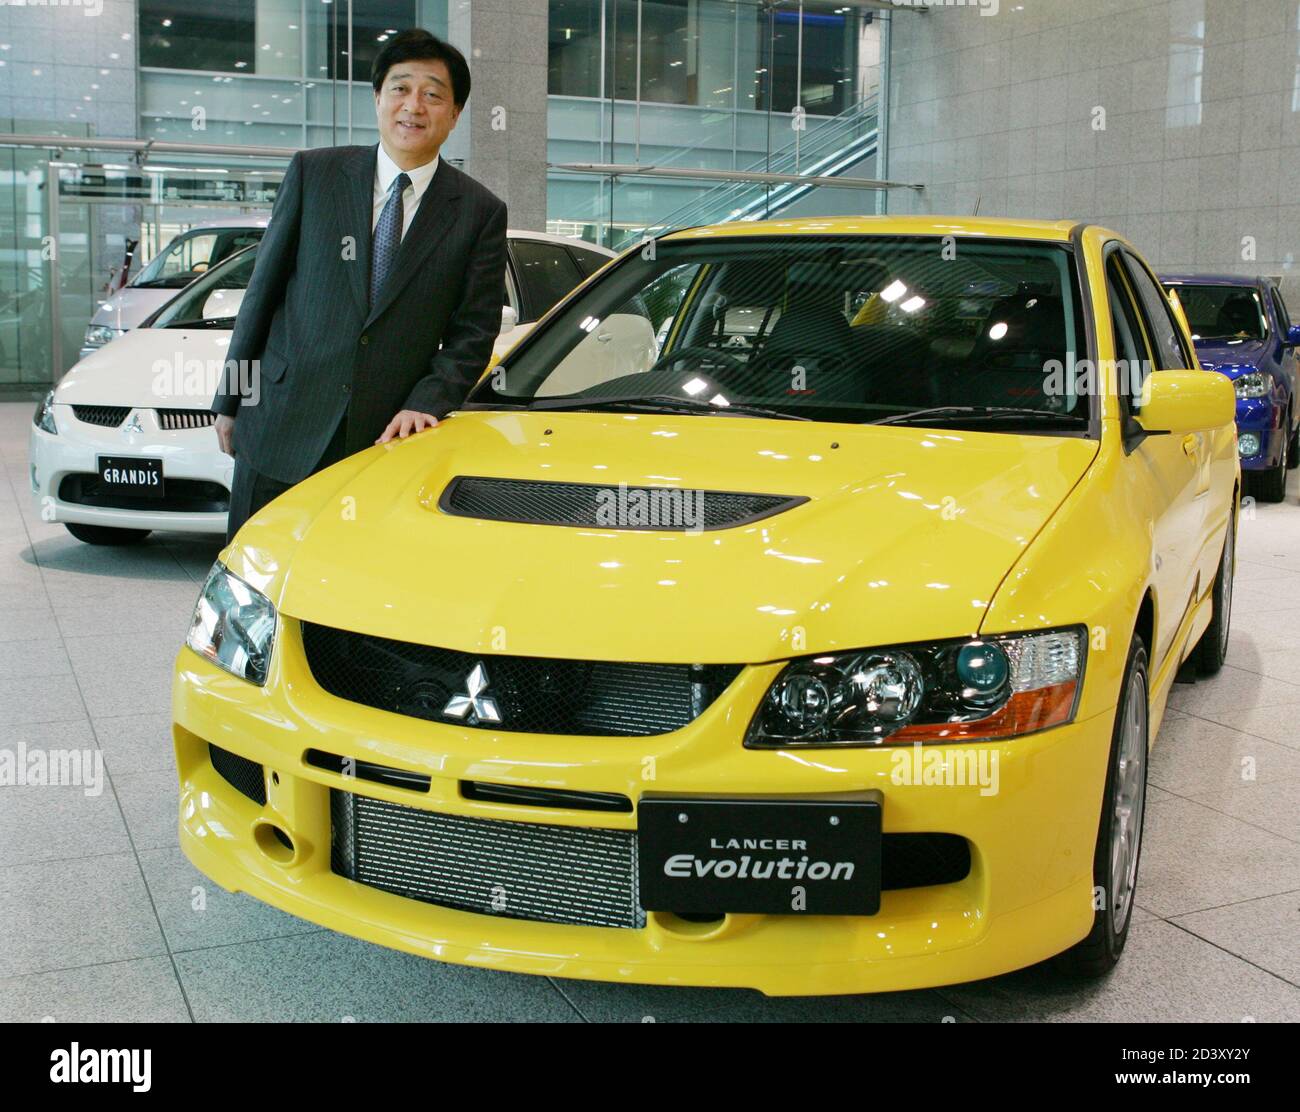 Mitsubishi Motors Corporation President Osamu Masuko Poses Next To The Company S New Sports Sedan The Lancer Evolution Ix At The Corporation S Headquarters In Tokyo March 2 05 The Car With A 2 0 Litre